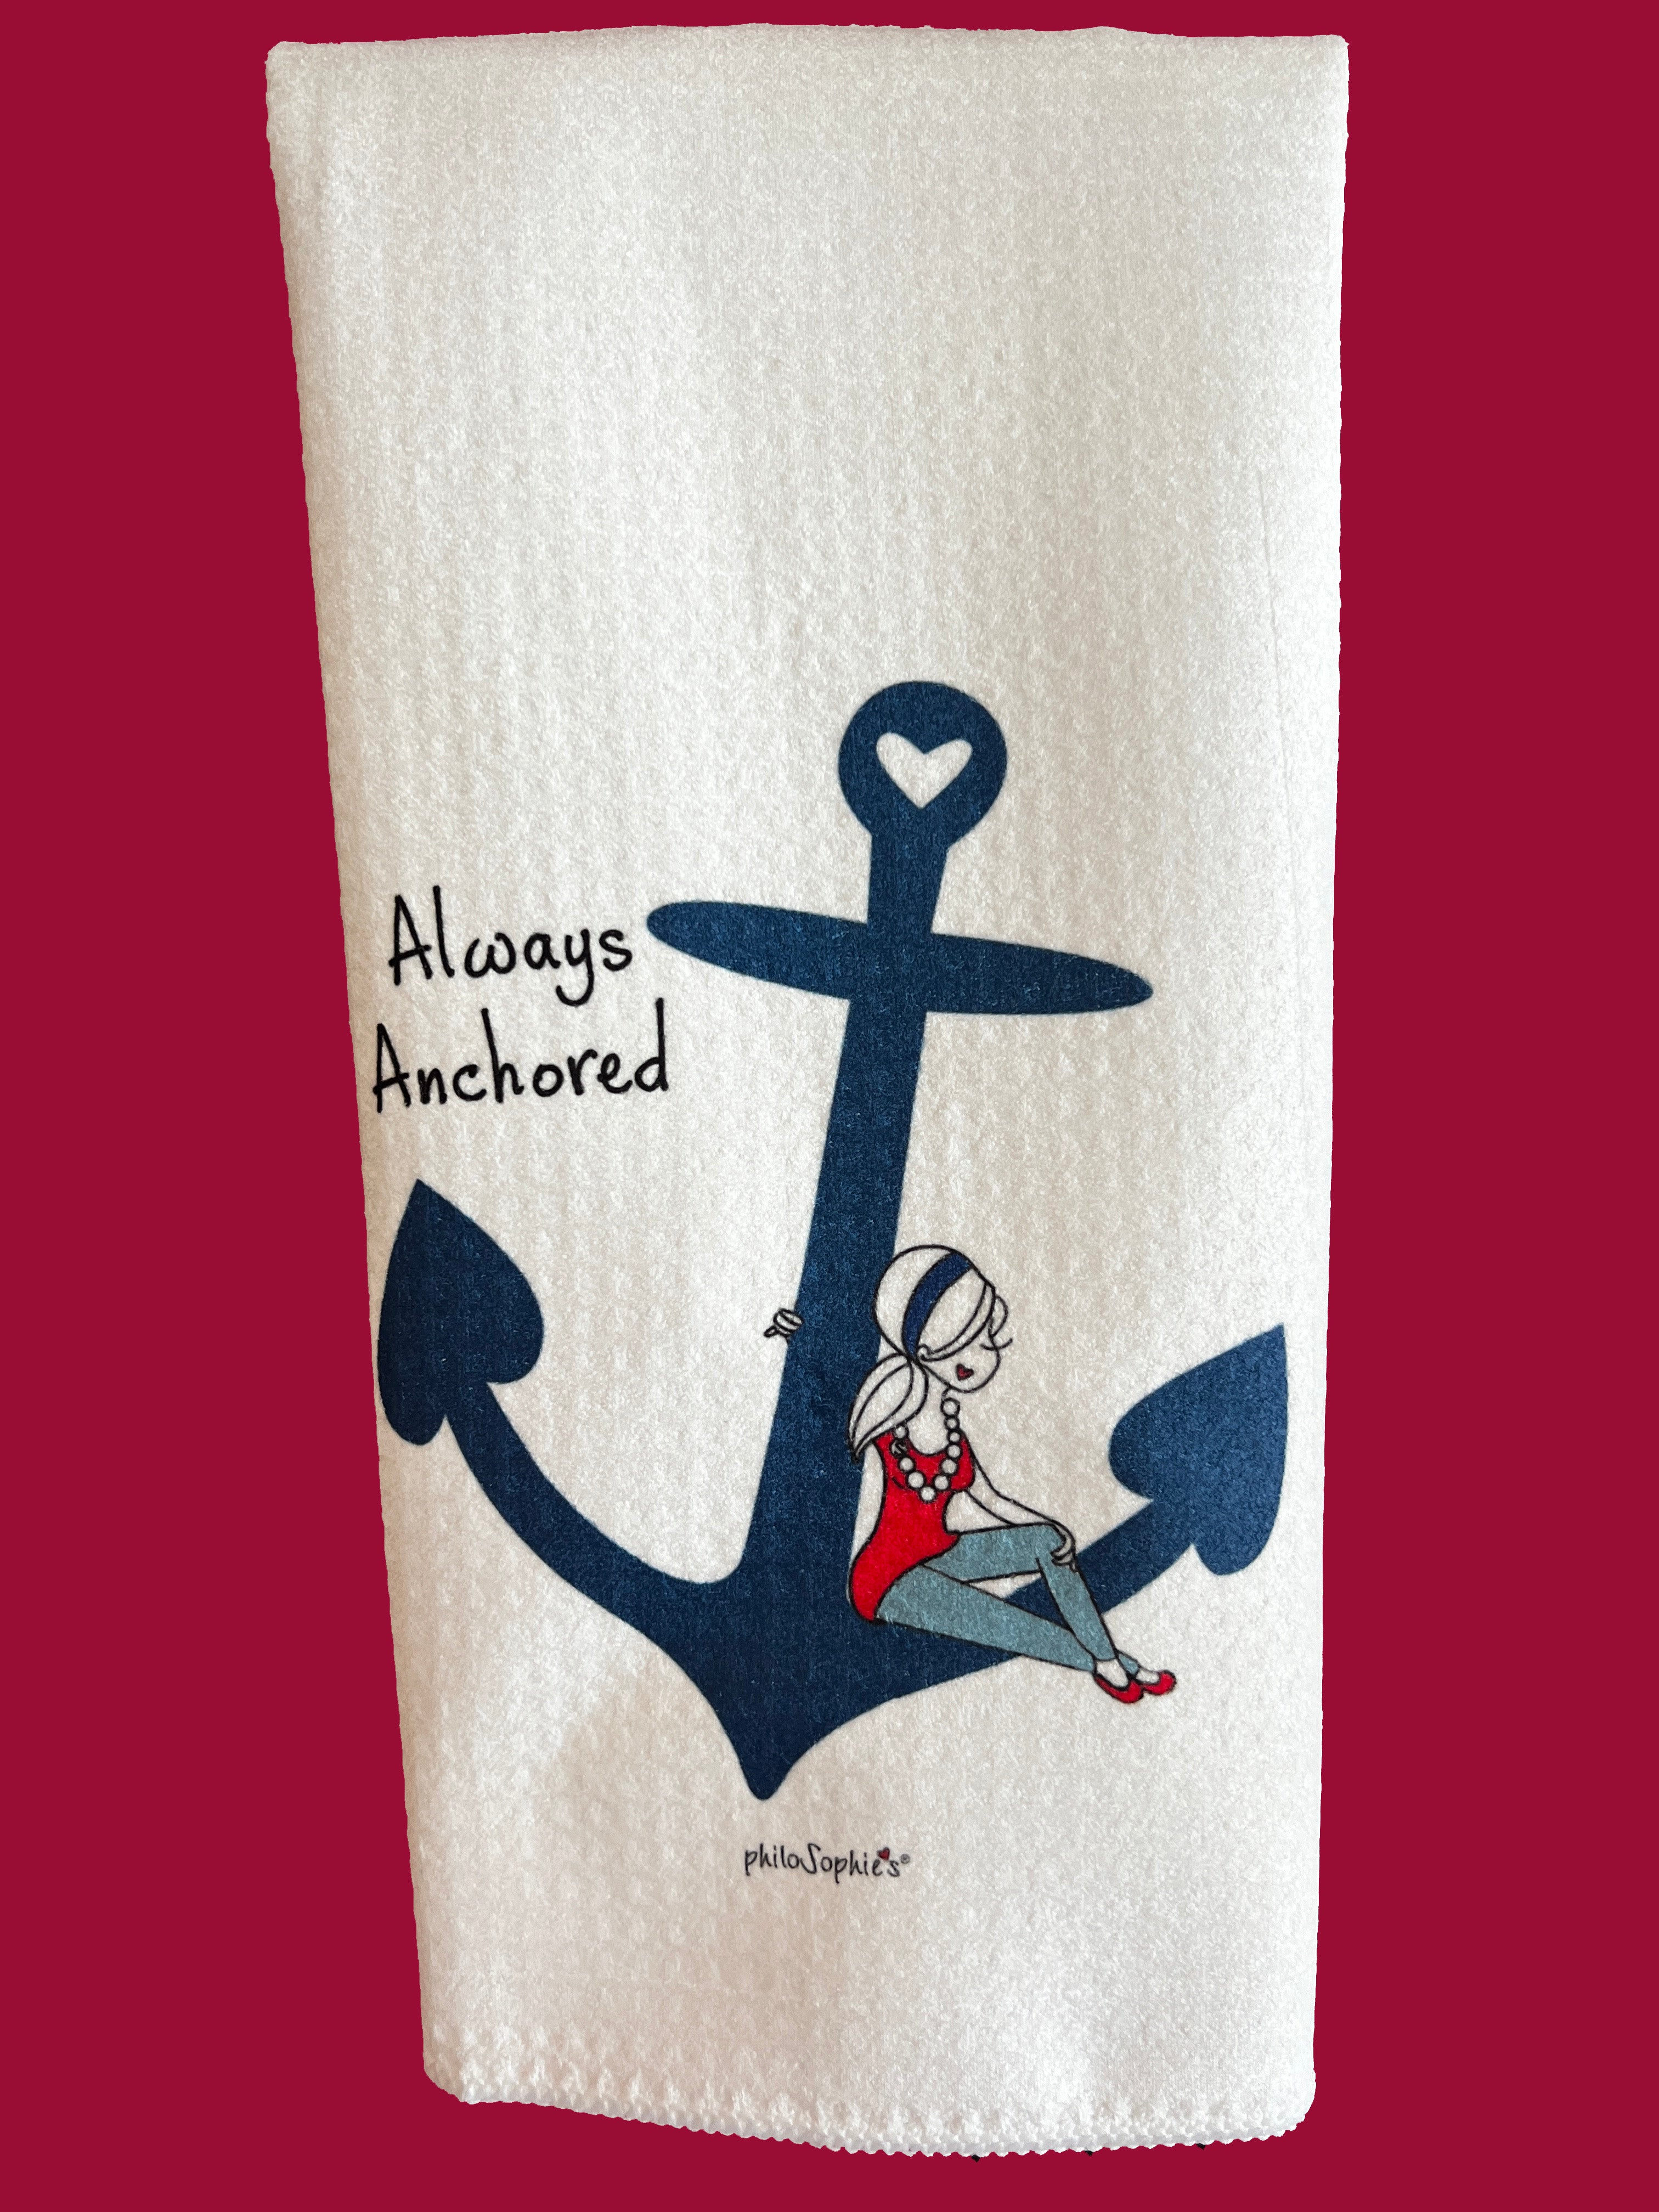 Always Anchored philoSophie's Waffle Towel